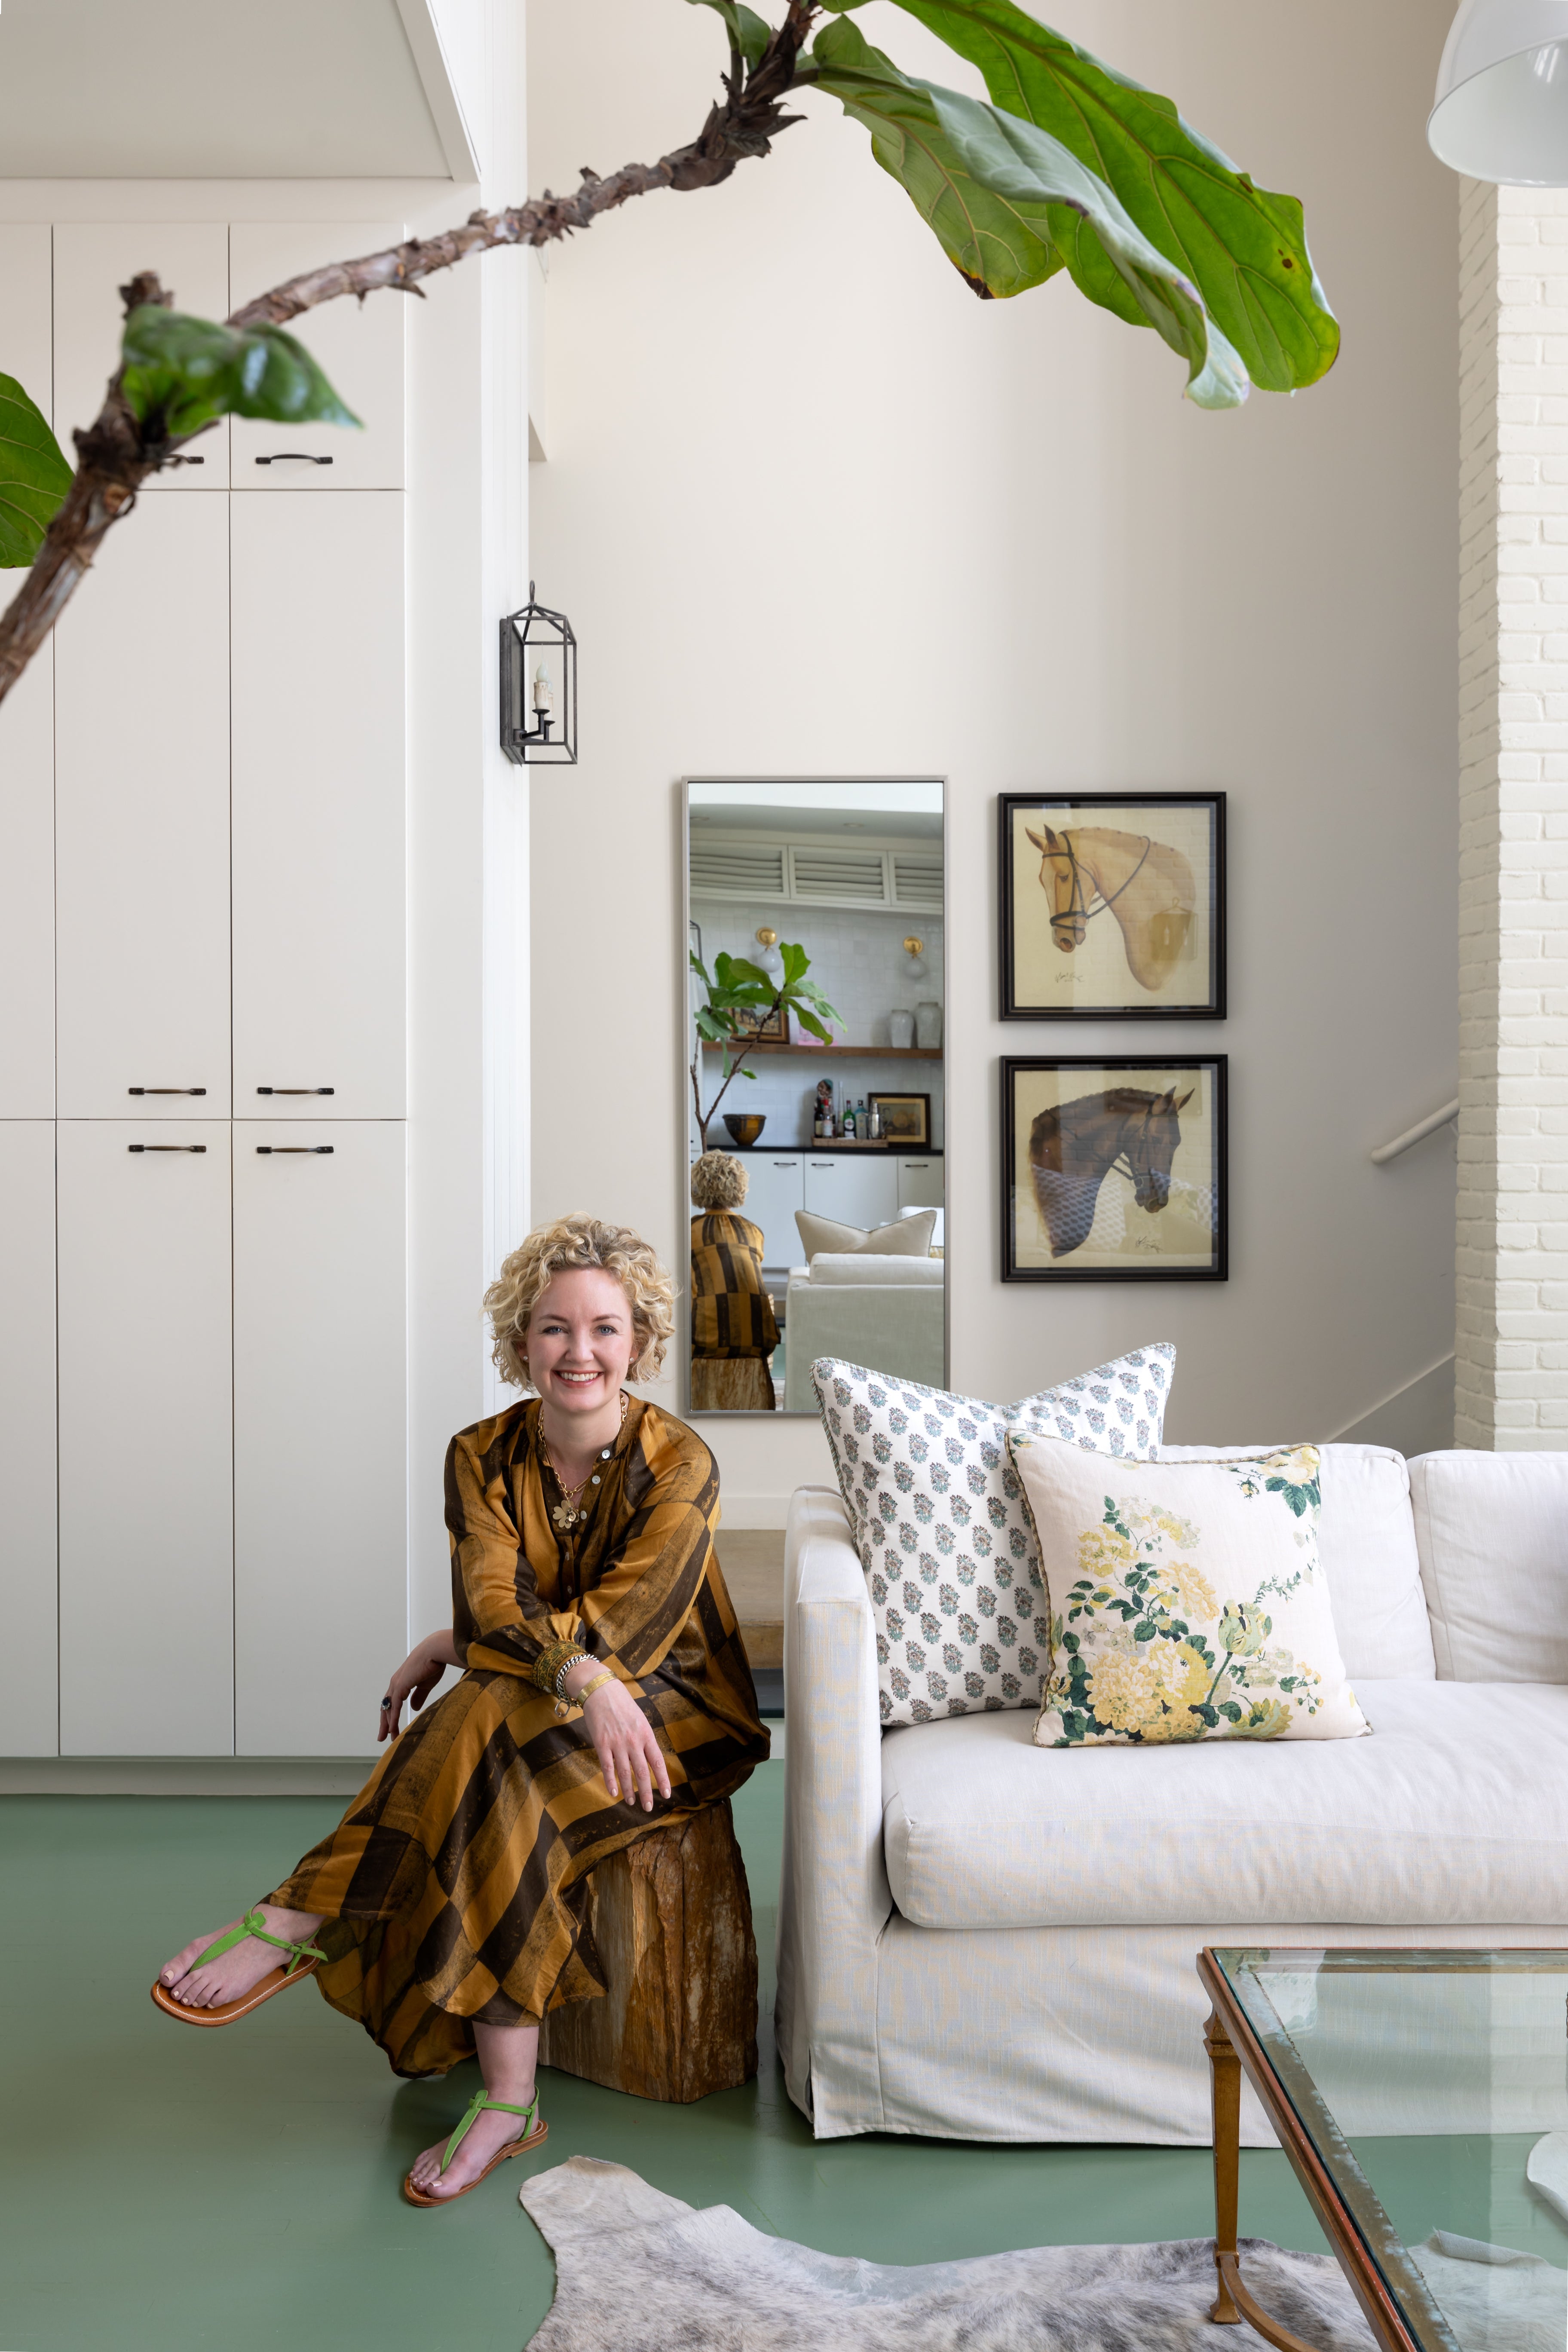 Client Spotlight: At Home with Emily